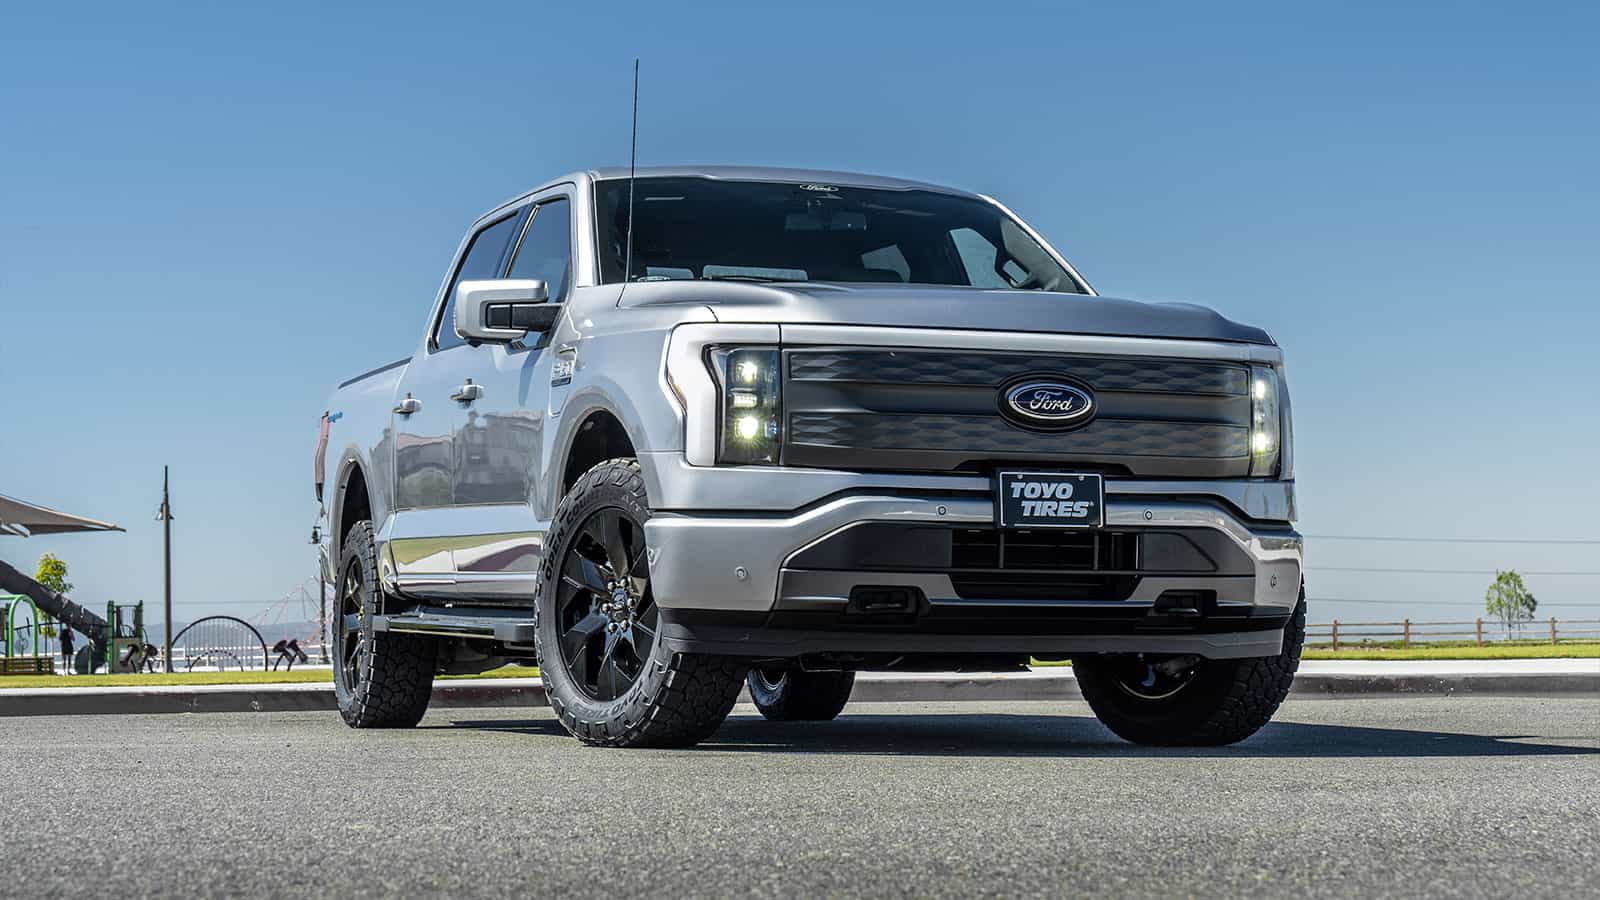 Toyo Tires EV all-terrain tires on ford truck